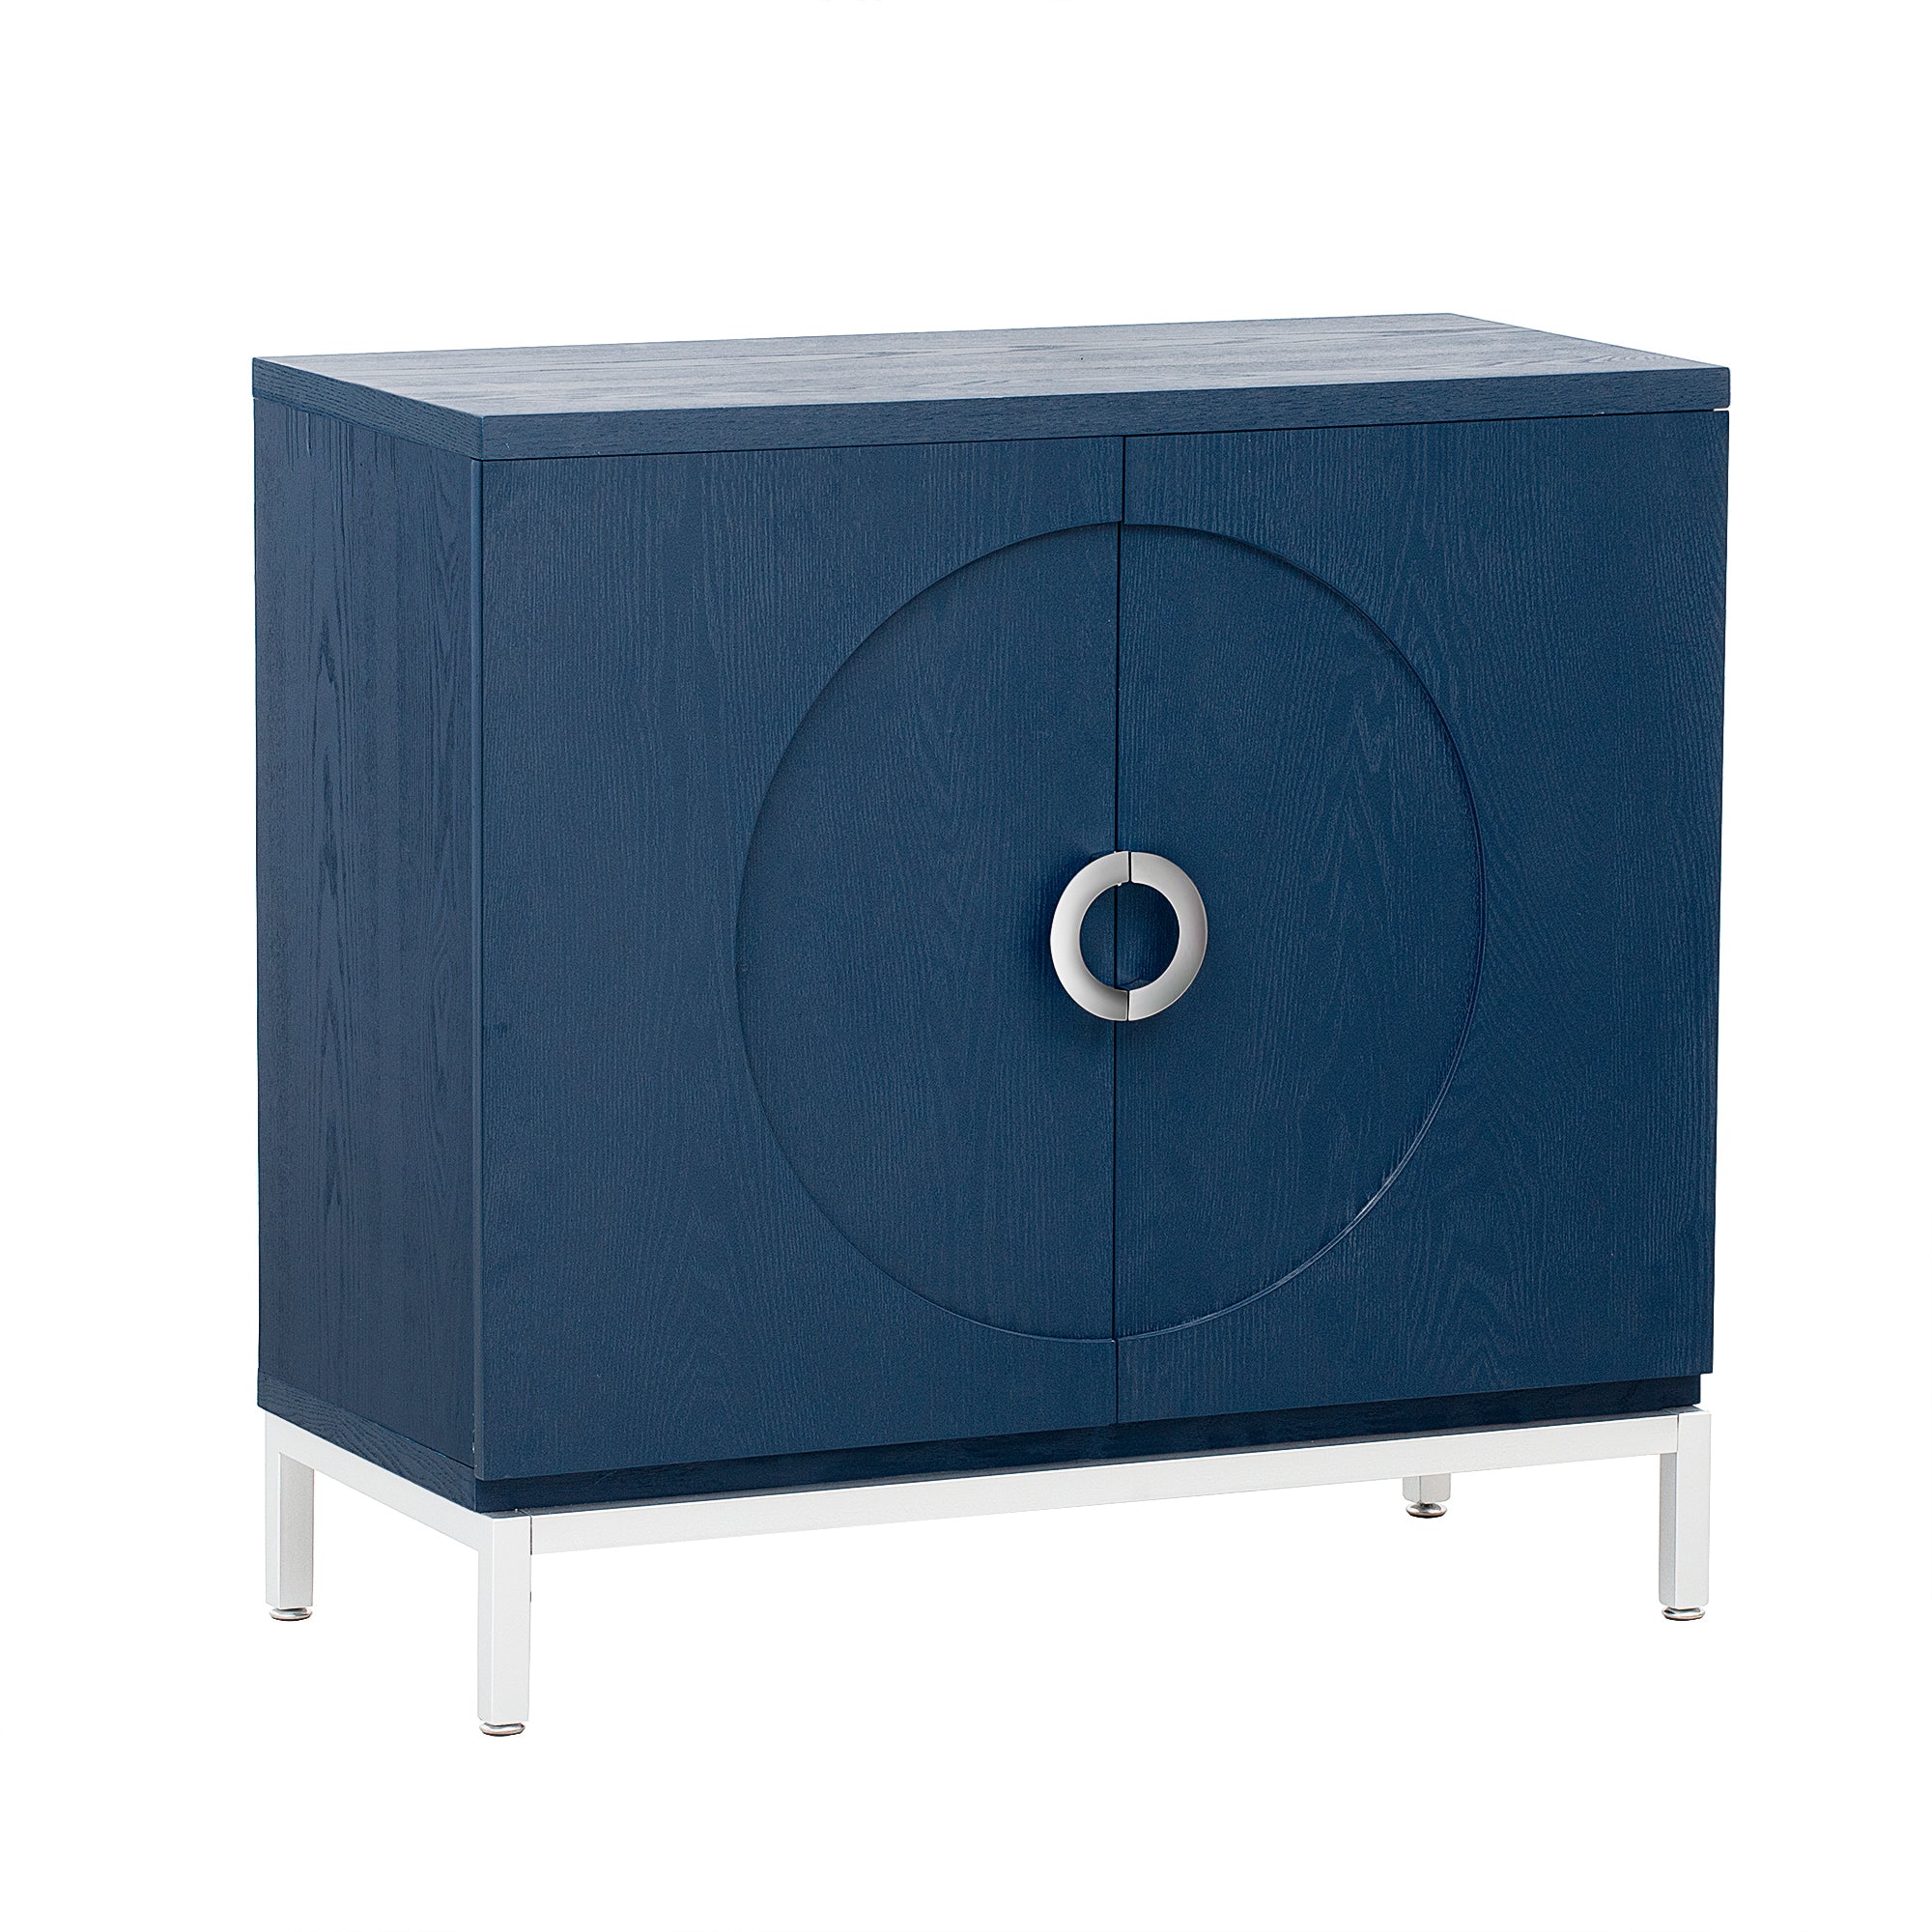 34" Navy Blue Entryway Accent Cabinet Chest, Console Table